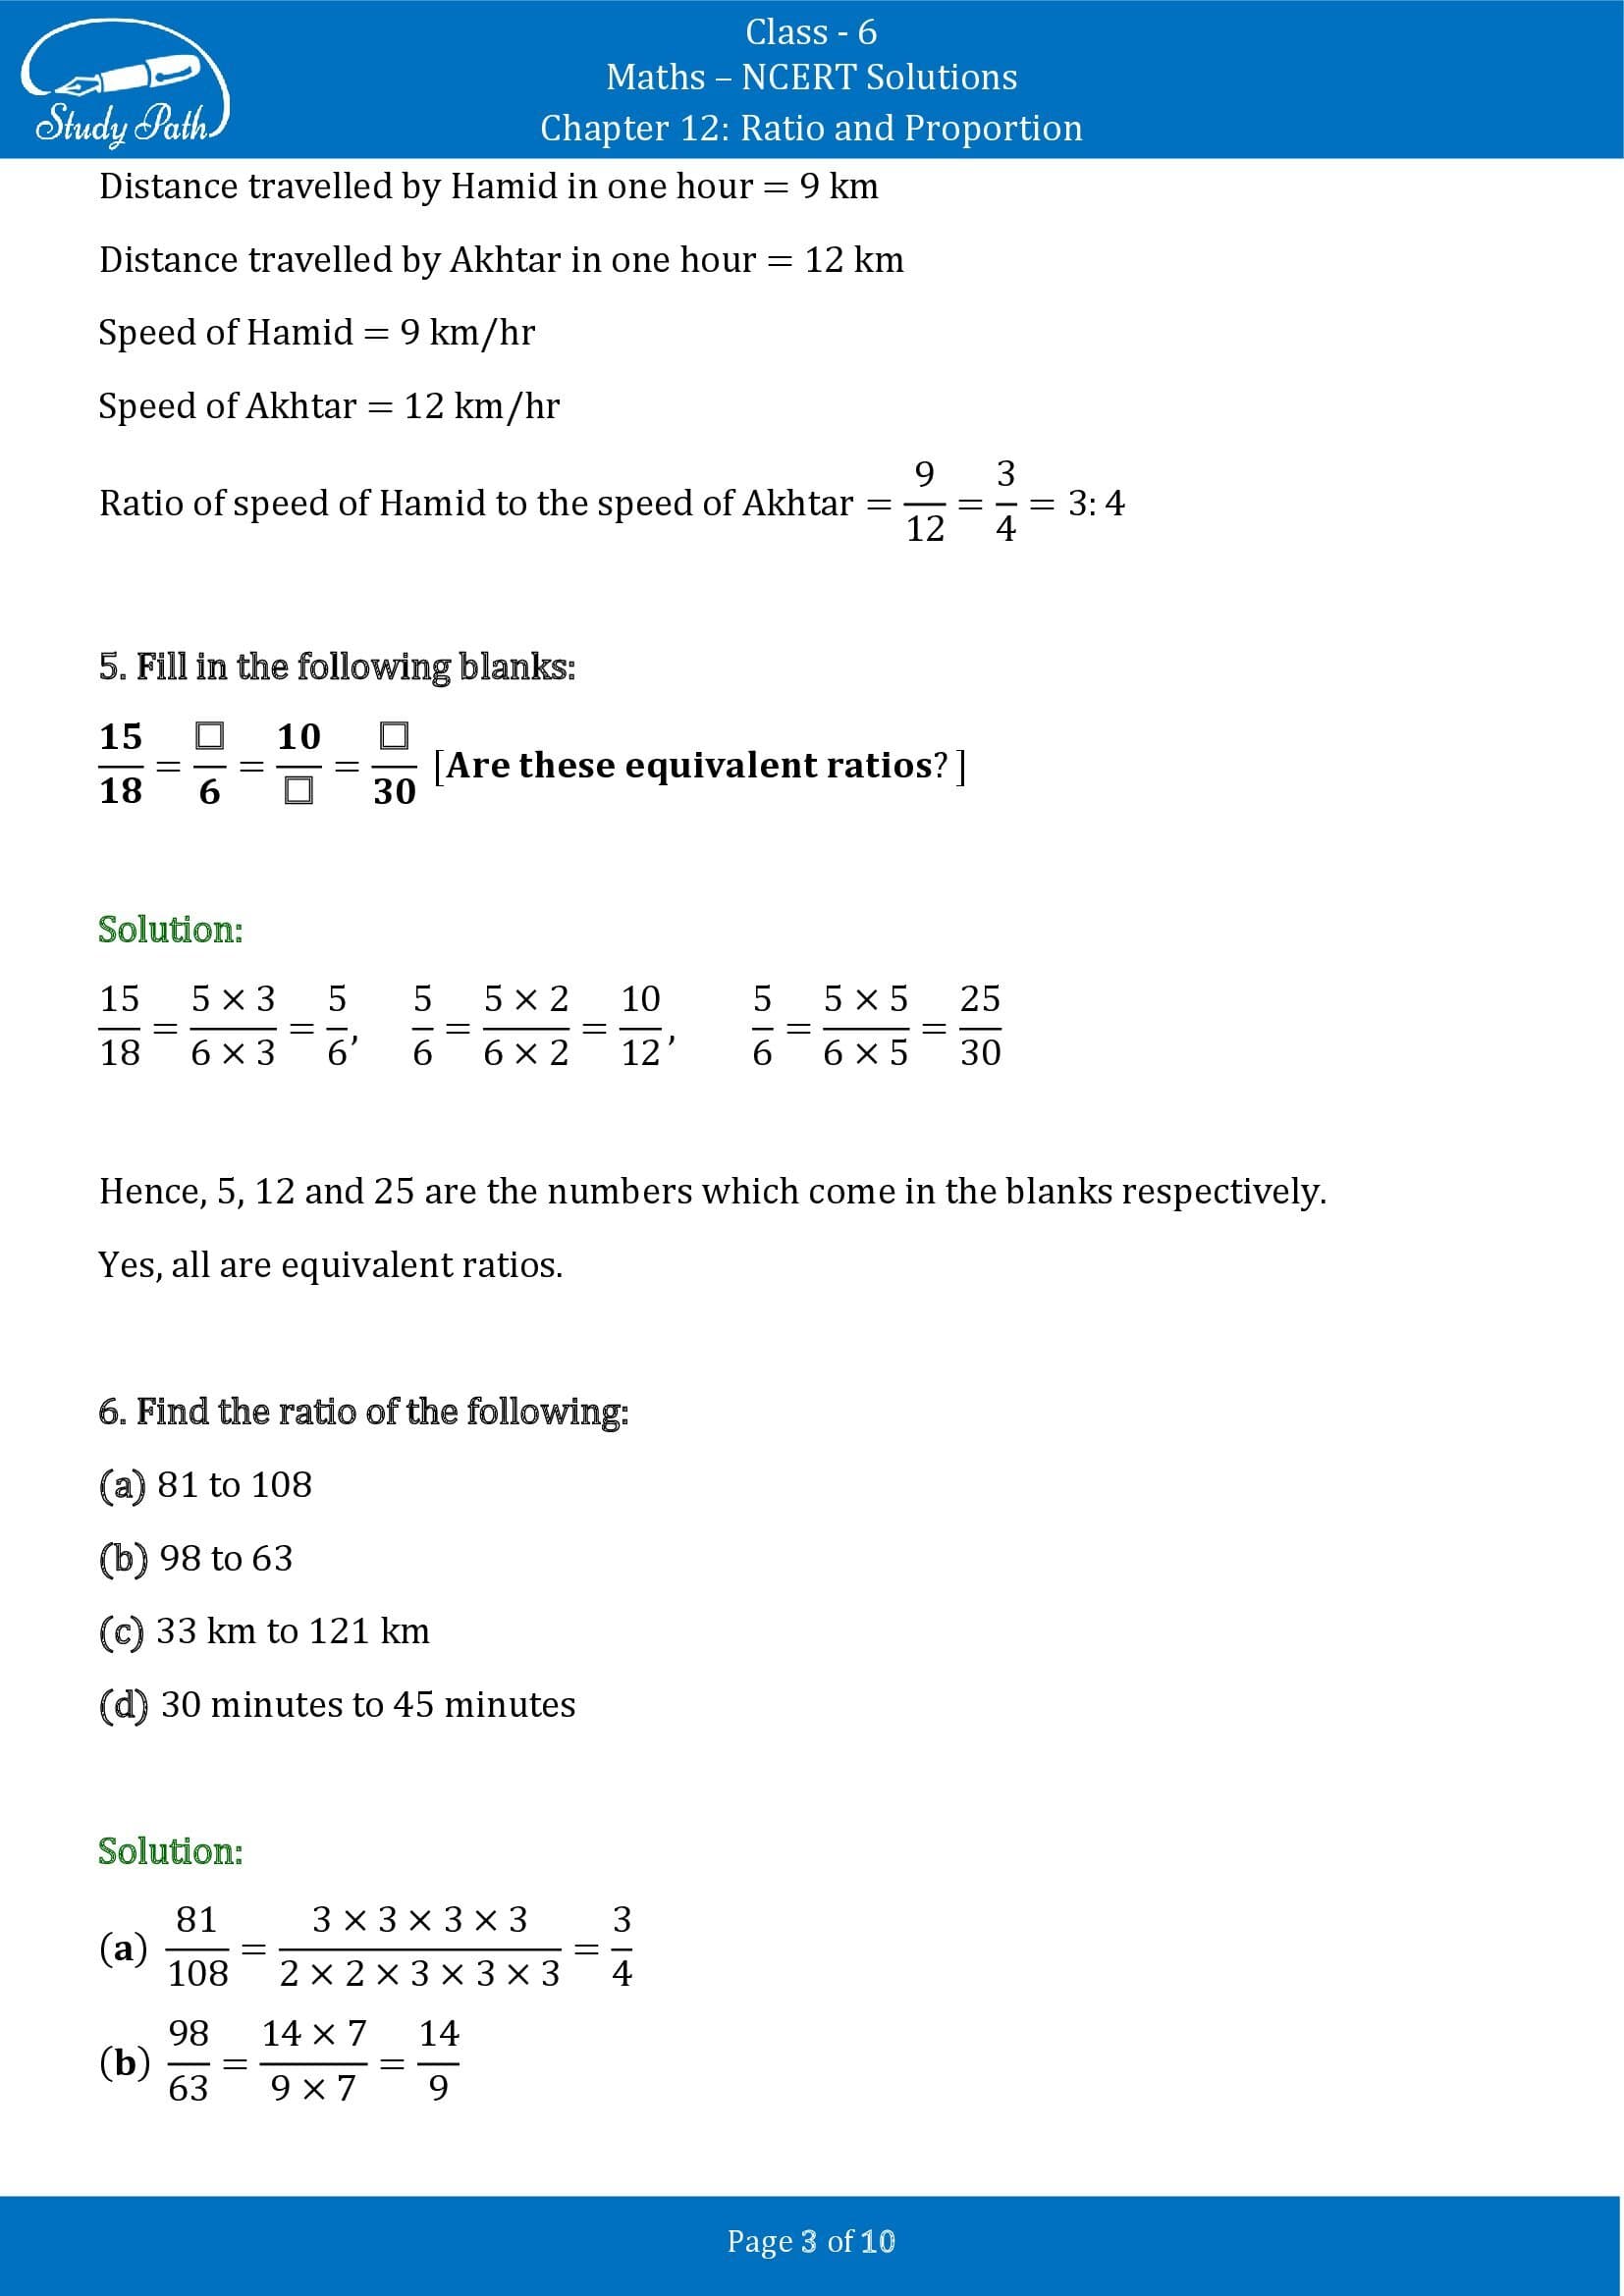 NCERT Solutions for Class 6 Maths Chapter 12 Ratio and Proportion Exercise 12.1 00003